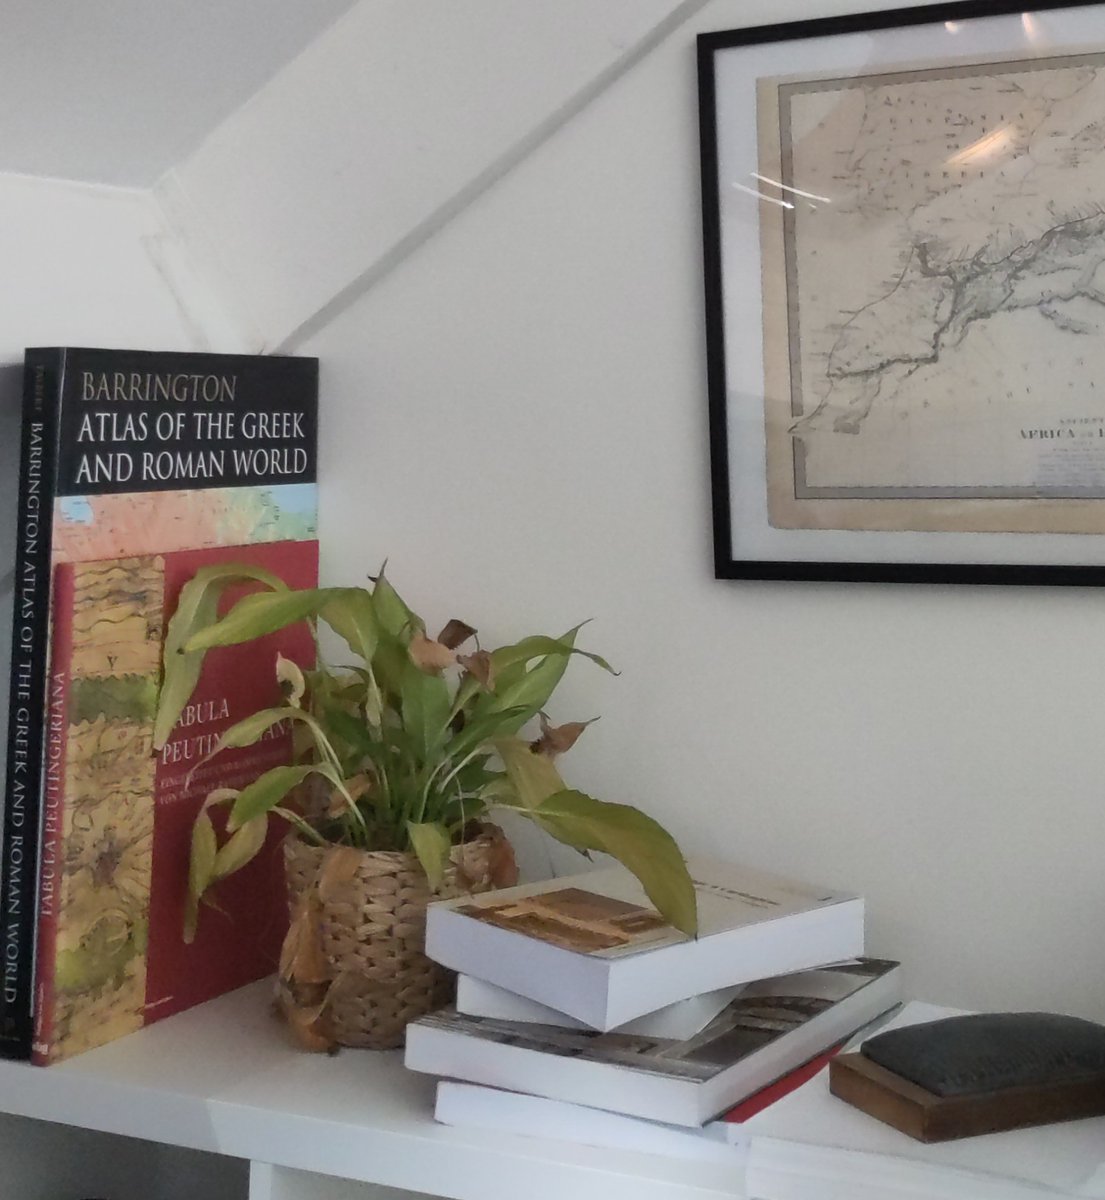 A fresh start of a new #AcademicYear for ATLAS. We're #backtooffice and continue our research into #Tunisia🇹🇳 & #Spain🇪🇸 in #LateAntiquity. Dusting off the books 📚 for the upcoming research meetings and seeing if we can revive our office plants 😉